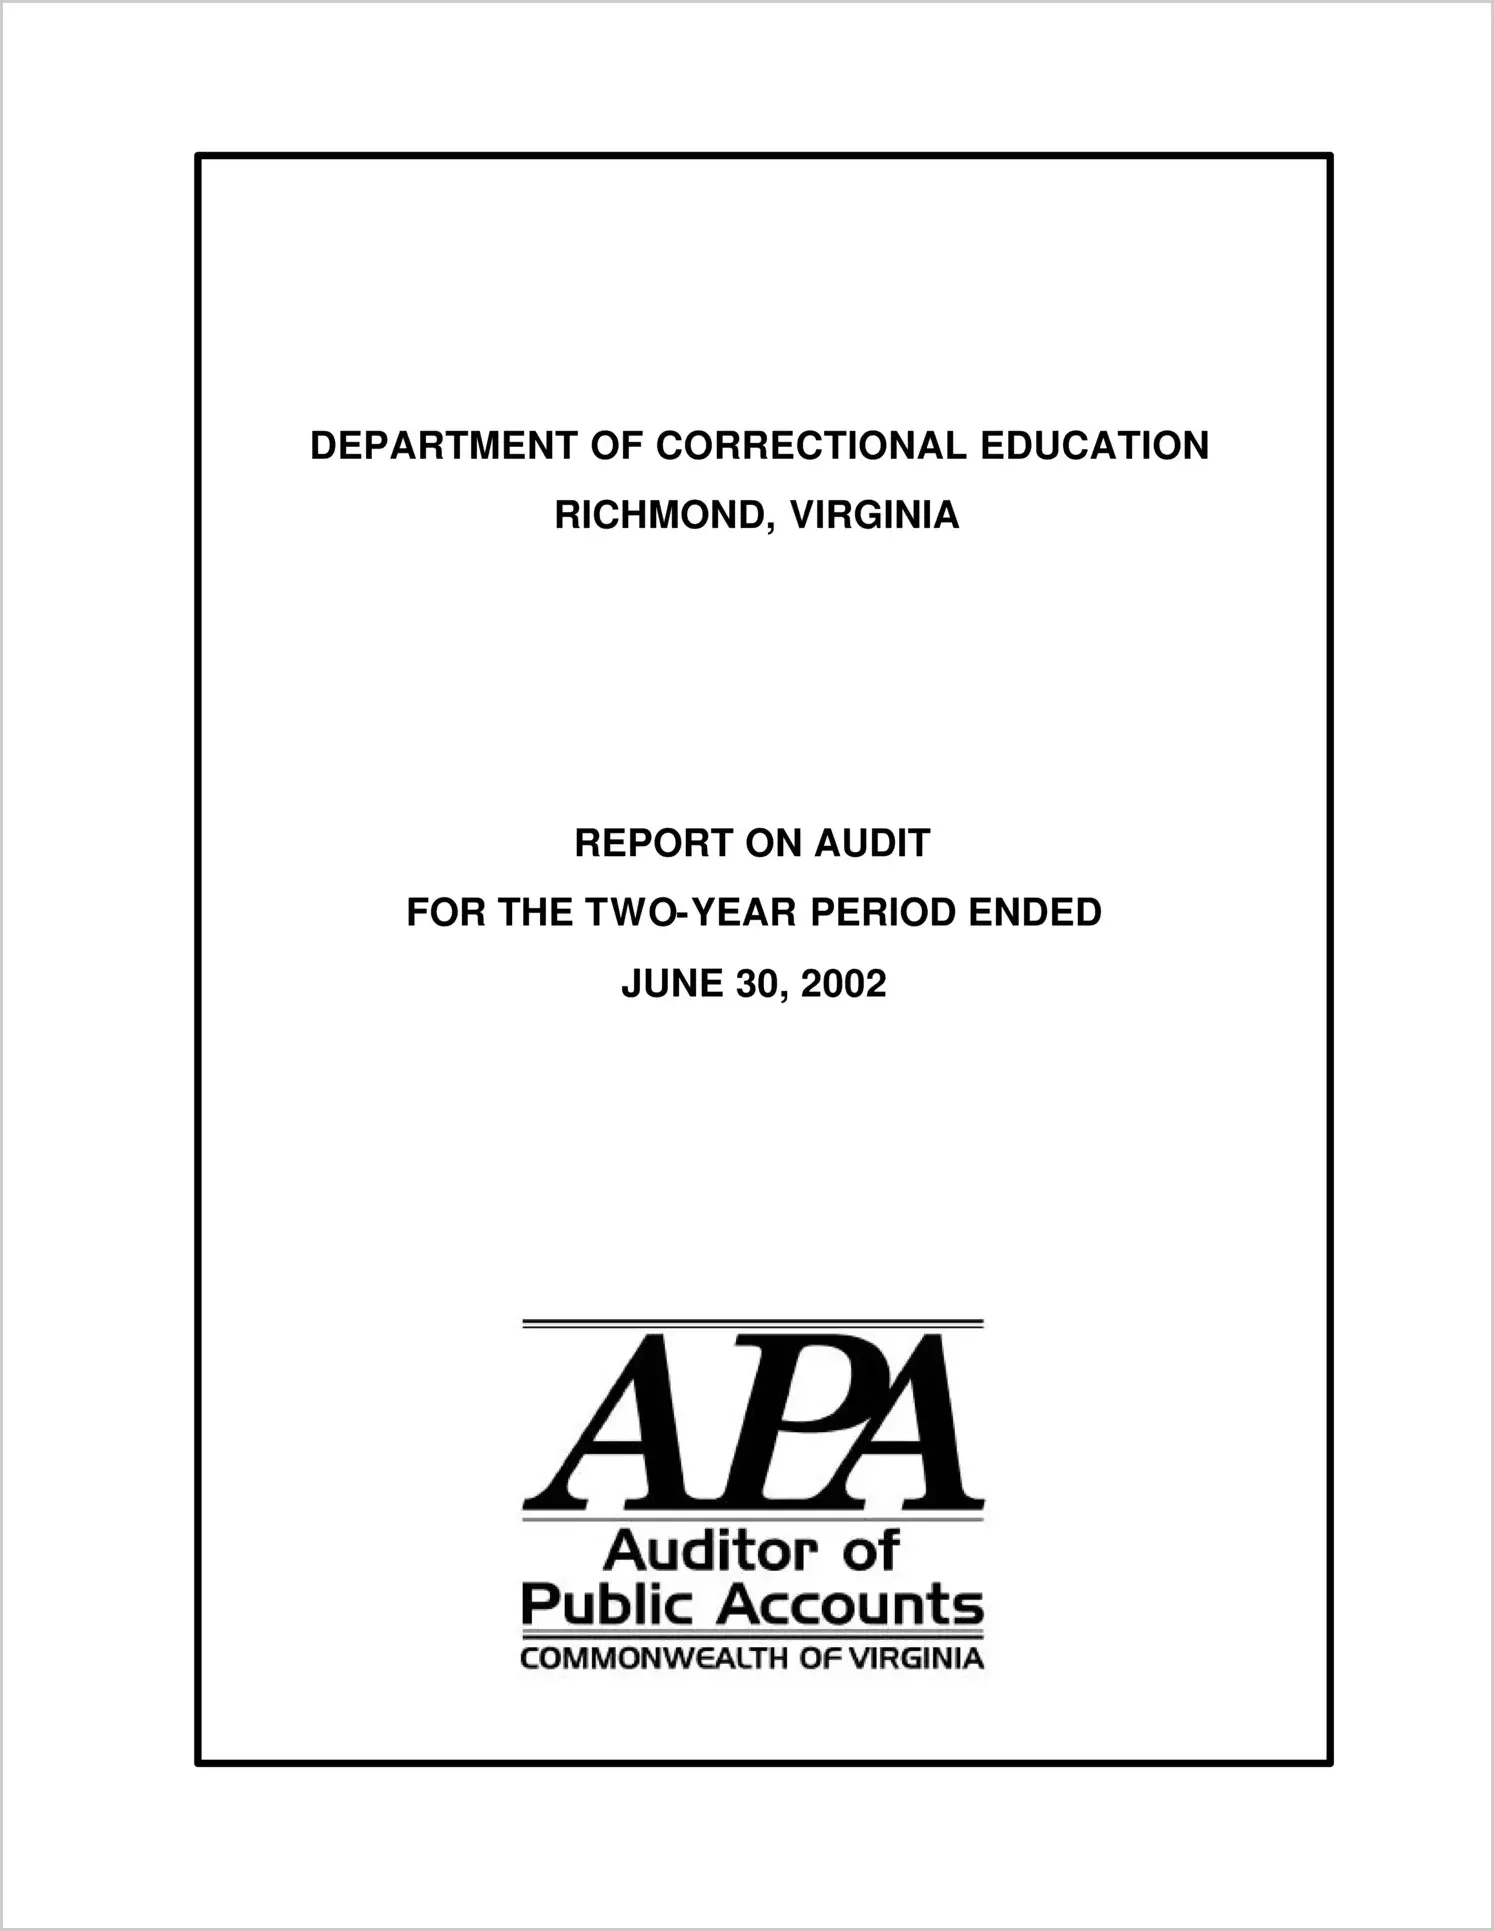 Department of Correctional Education for the two-year period ended June 30, 2002